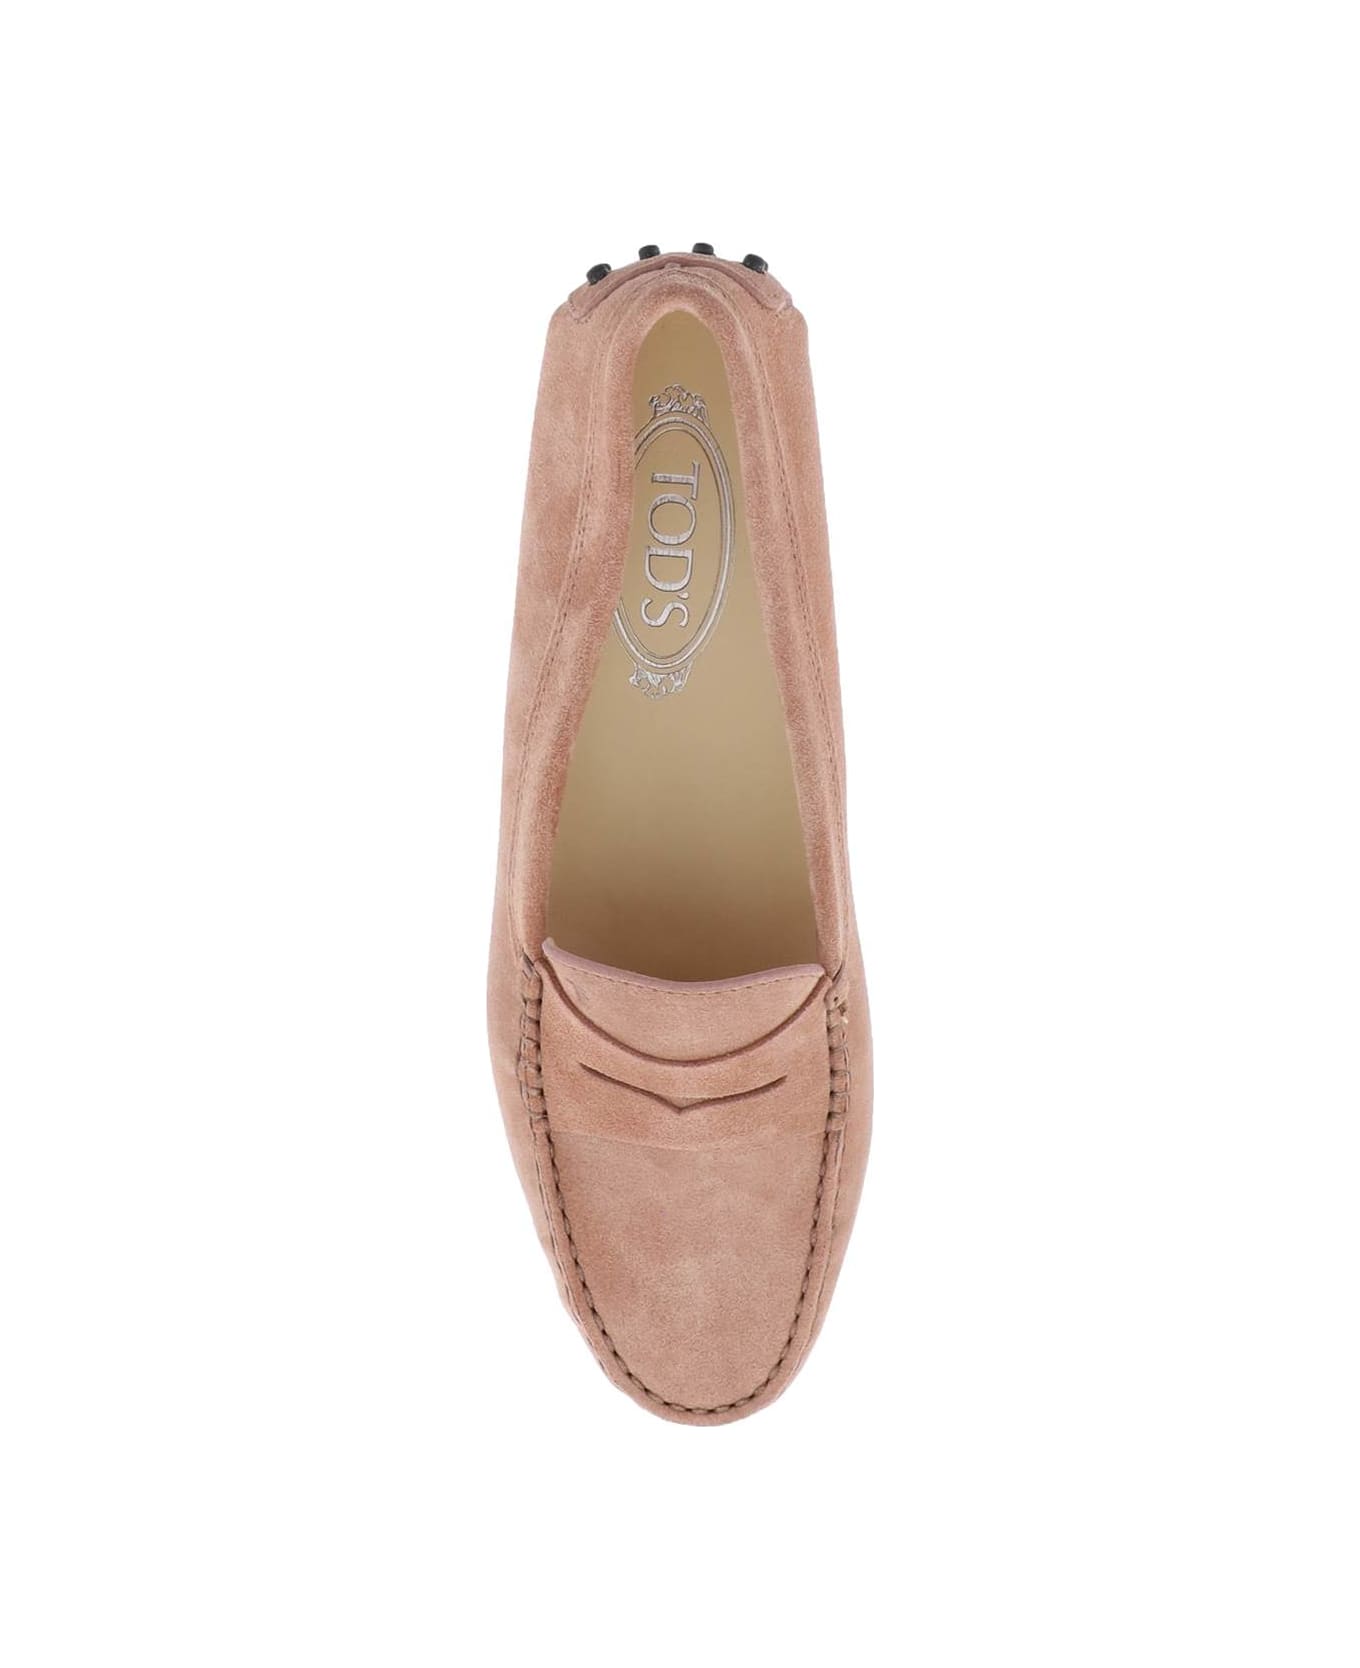 Tod's Gommino Loafers - COTTO CHIARO (Pink)